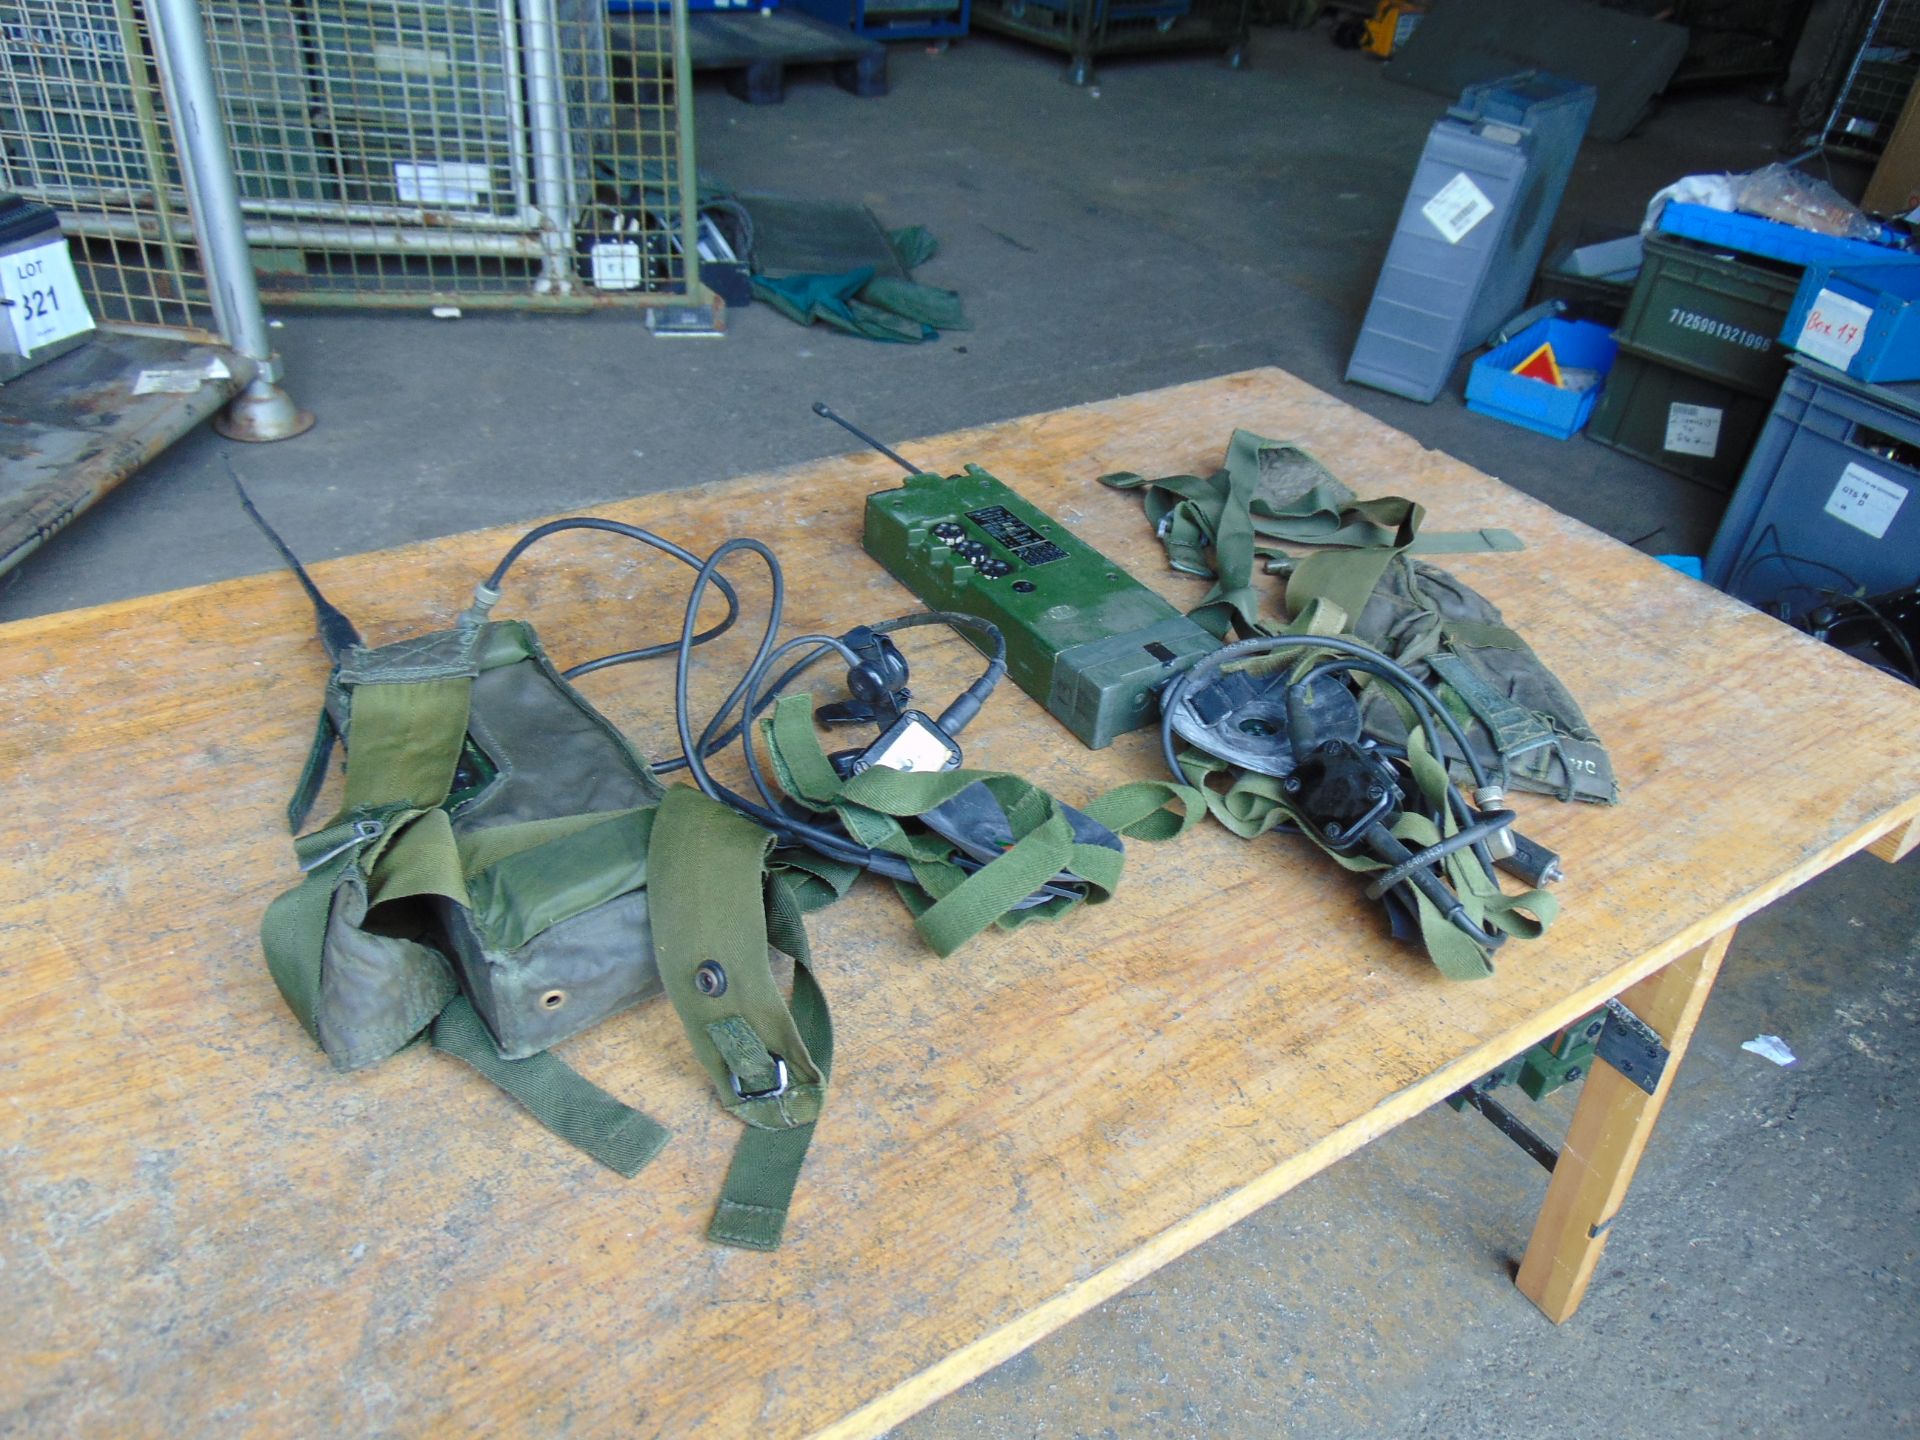 2 x RT 349 British Army Transmitter / Receiver c/w Pouch, Headset, Antenna and Battery Cassette - Image 4 of 4